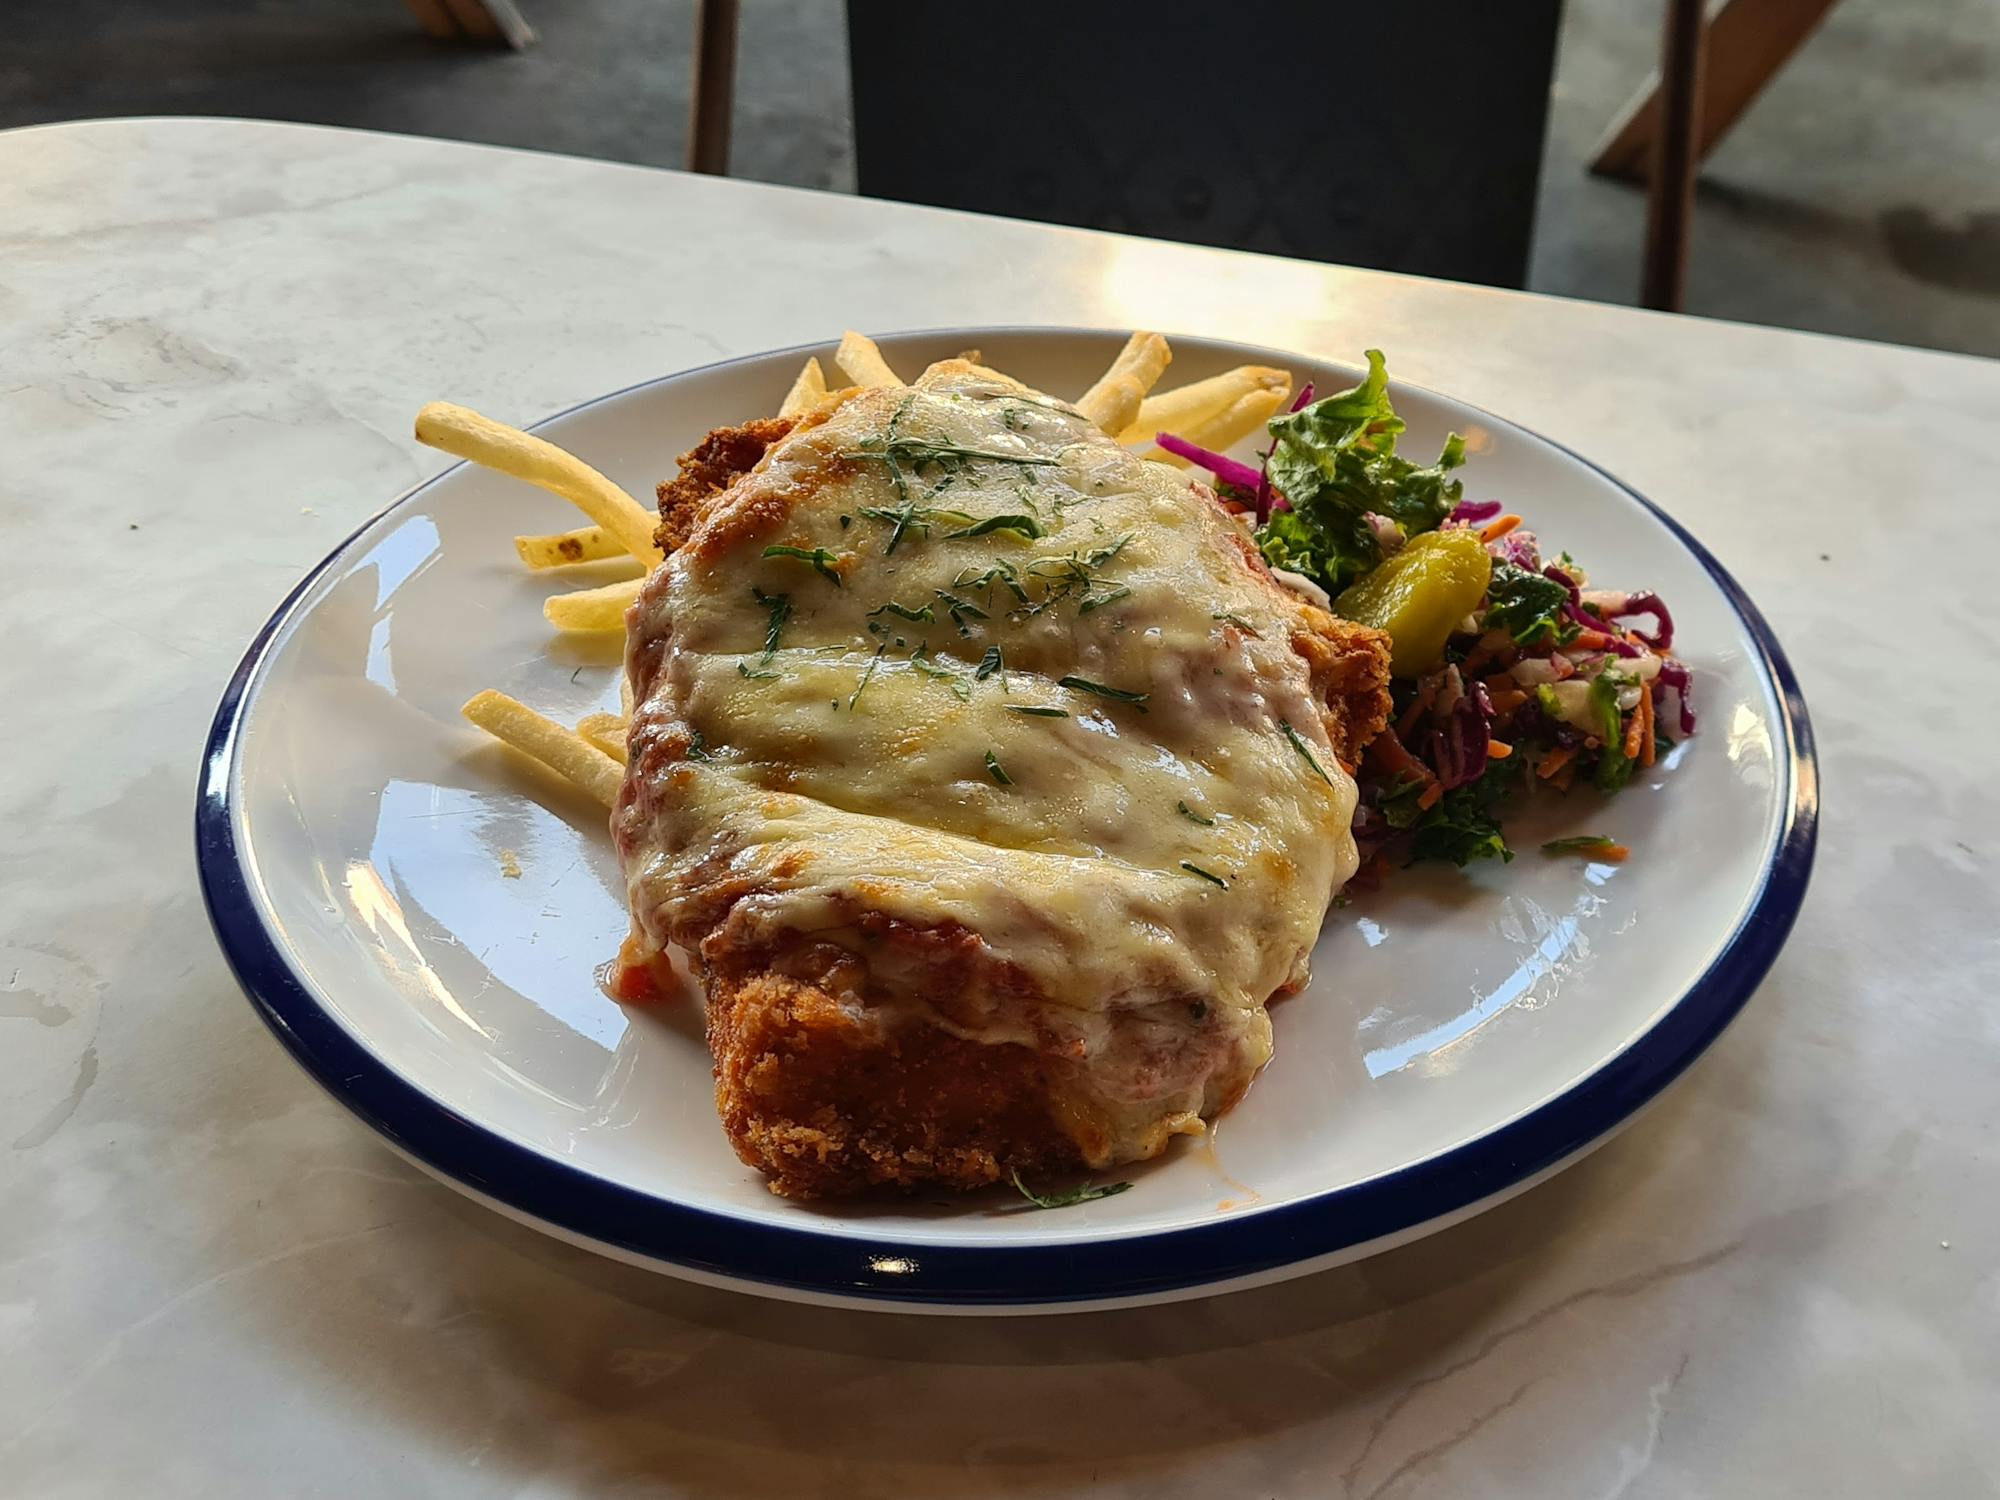 Slab of crumbed, fried chicken, covered in marinara sauce and melted cheese